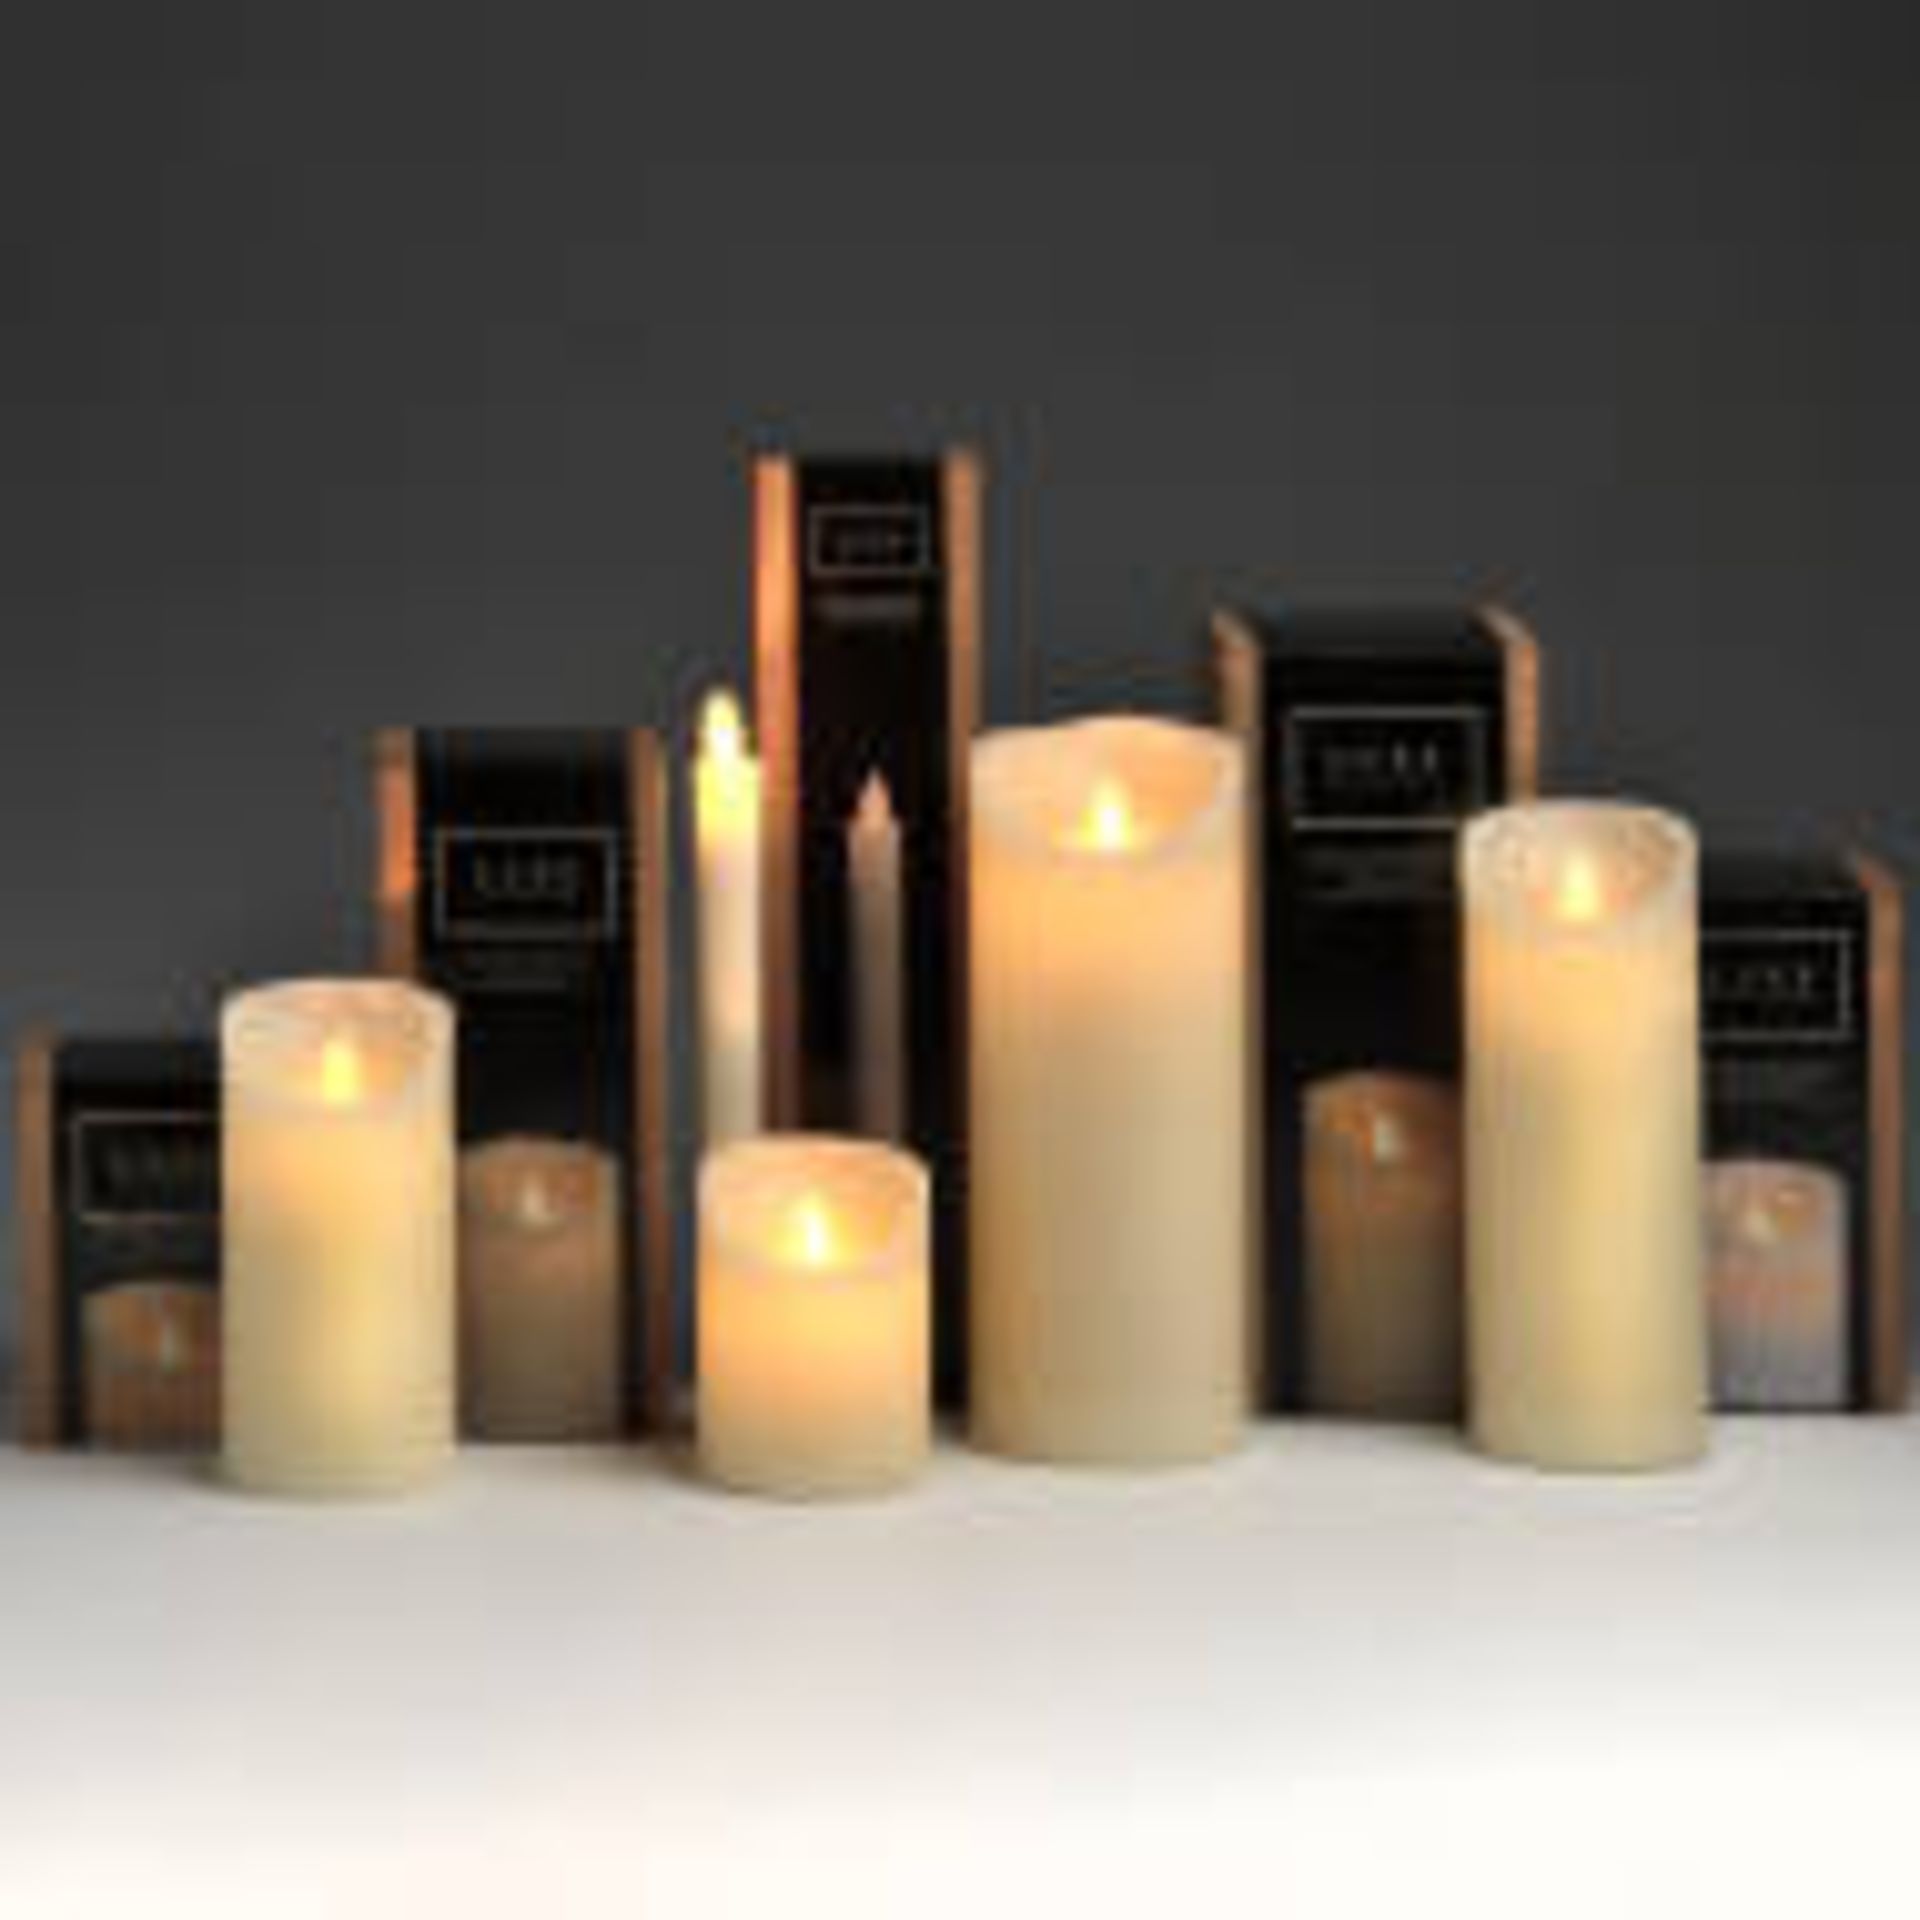 2 x Luxe Collection 3.5 x 9 Cream Flickering Flame LED Wax Candle This real wax battery operated